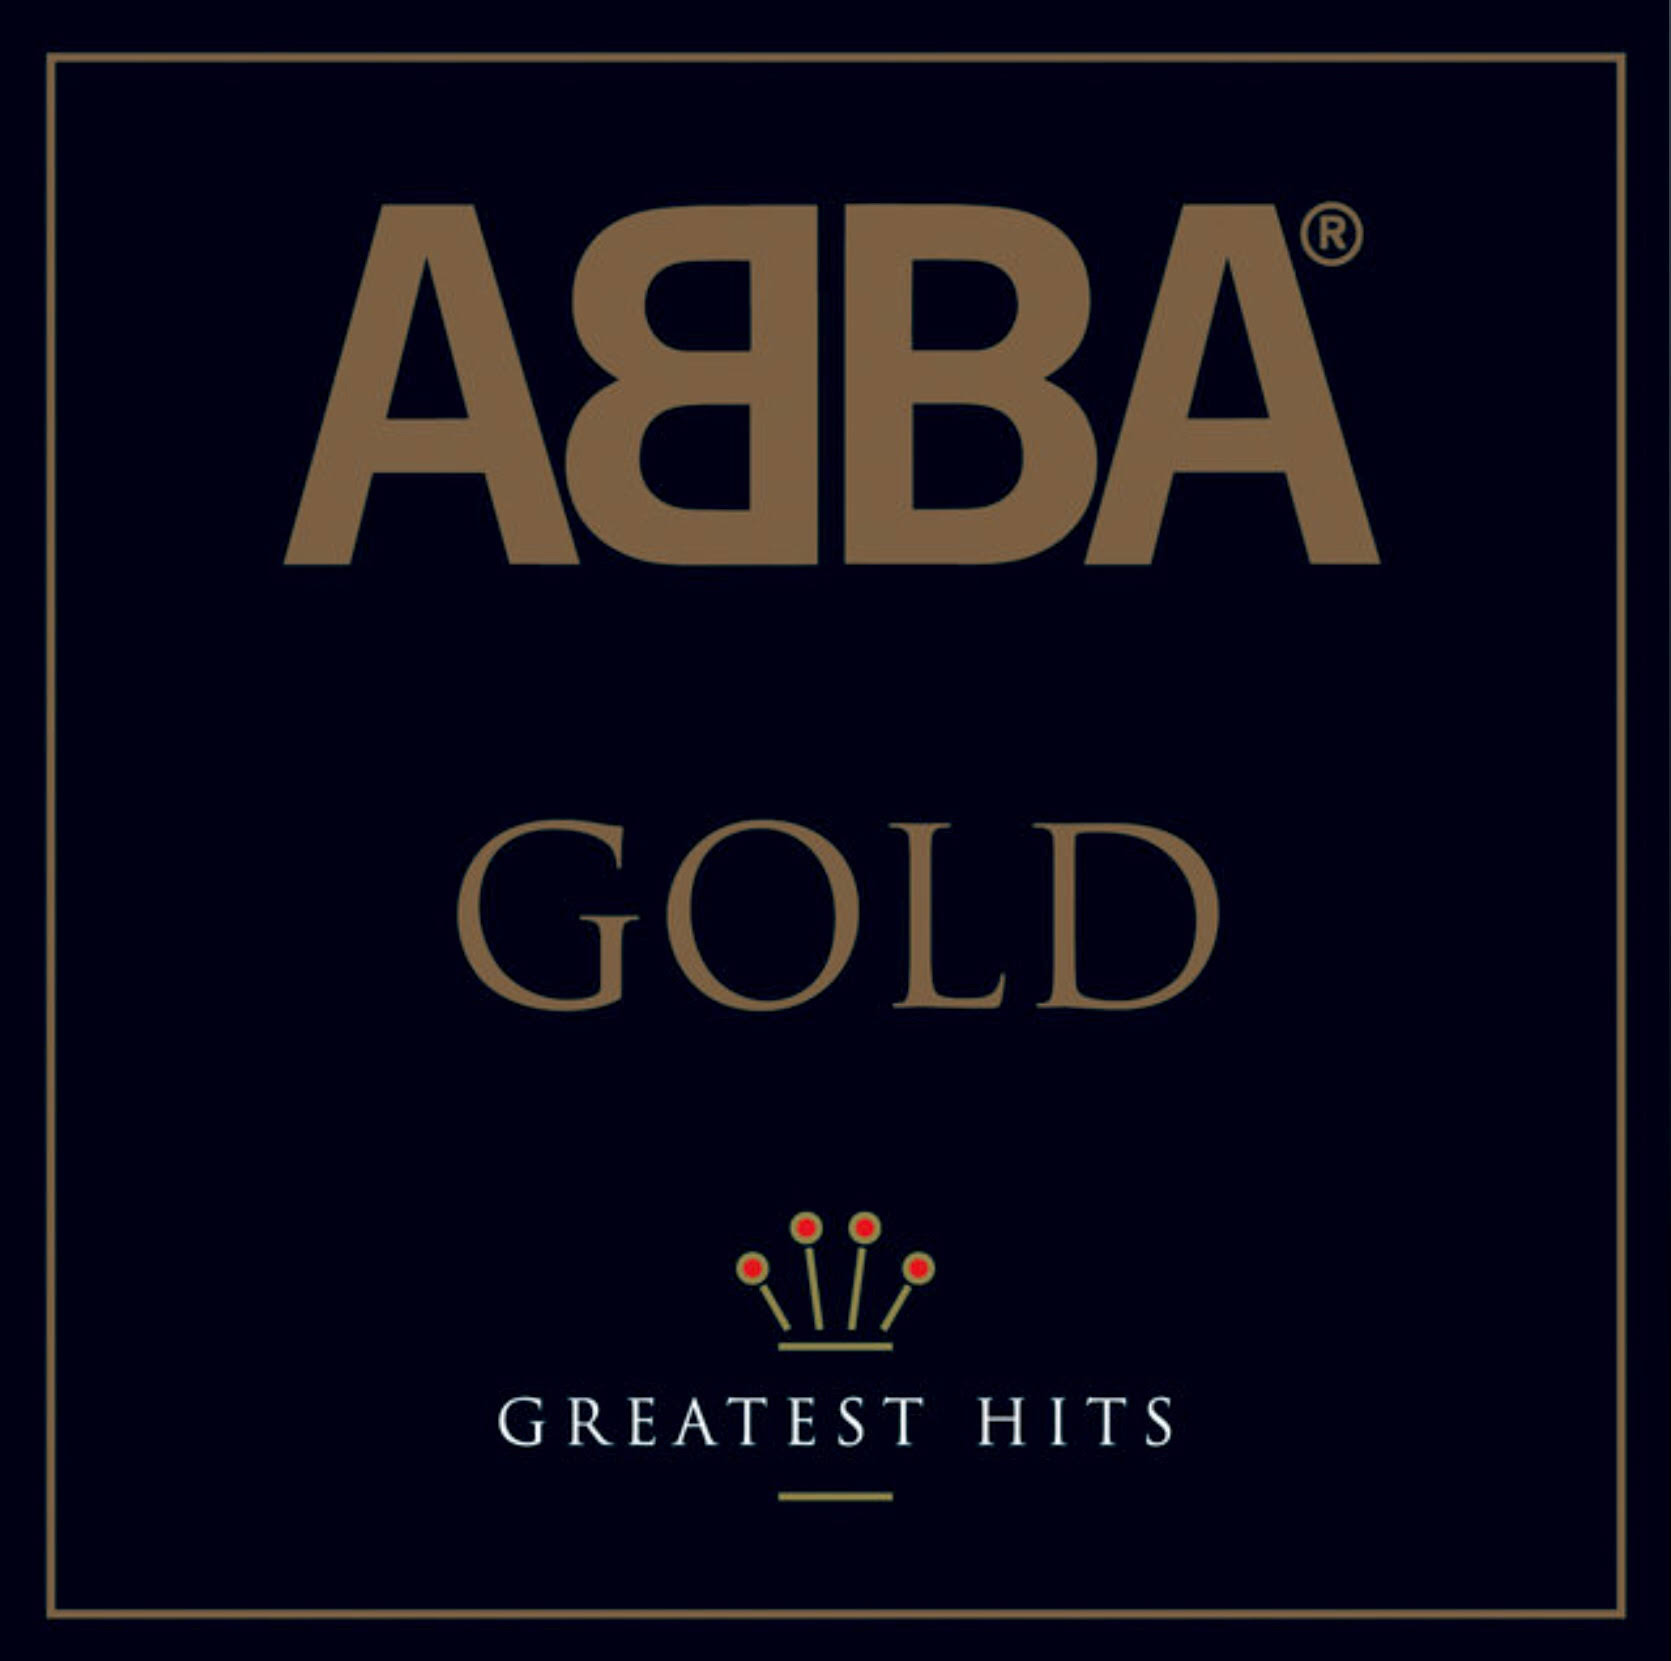 Gold Greatest Hits - ABBA